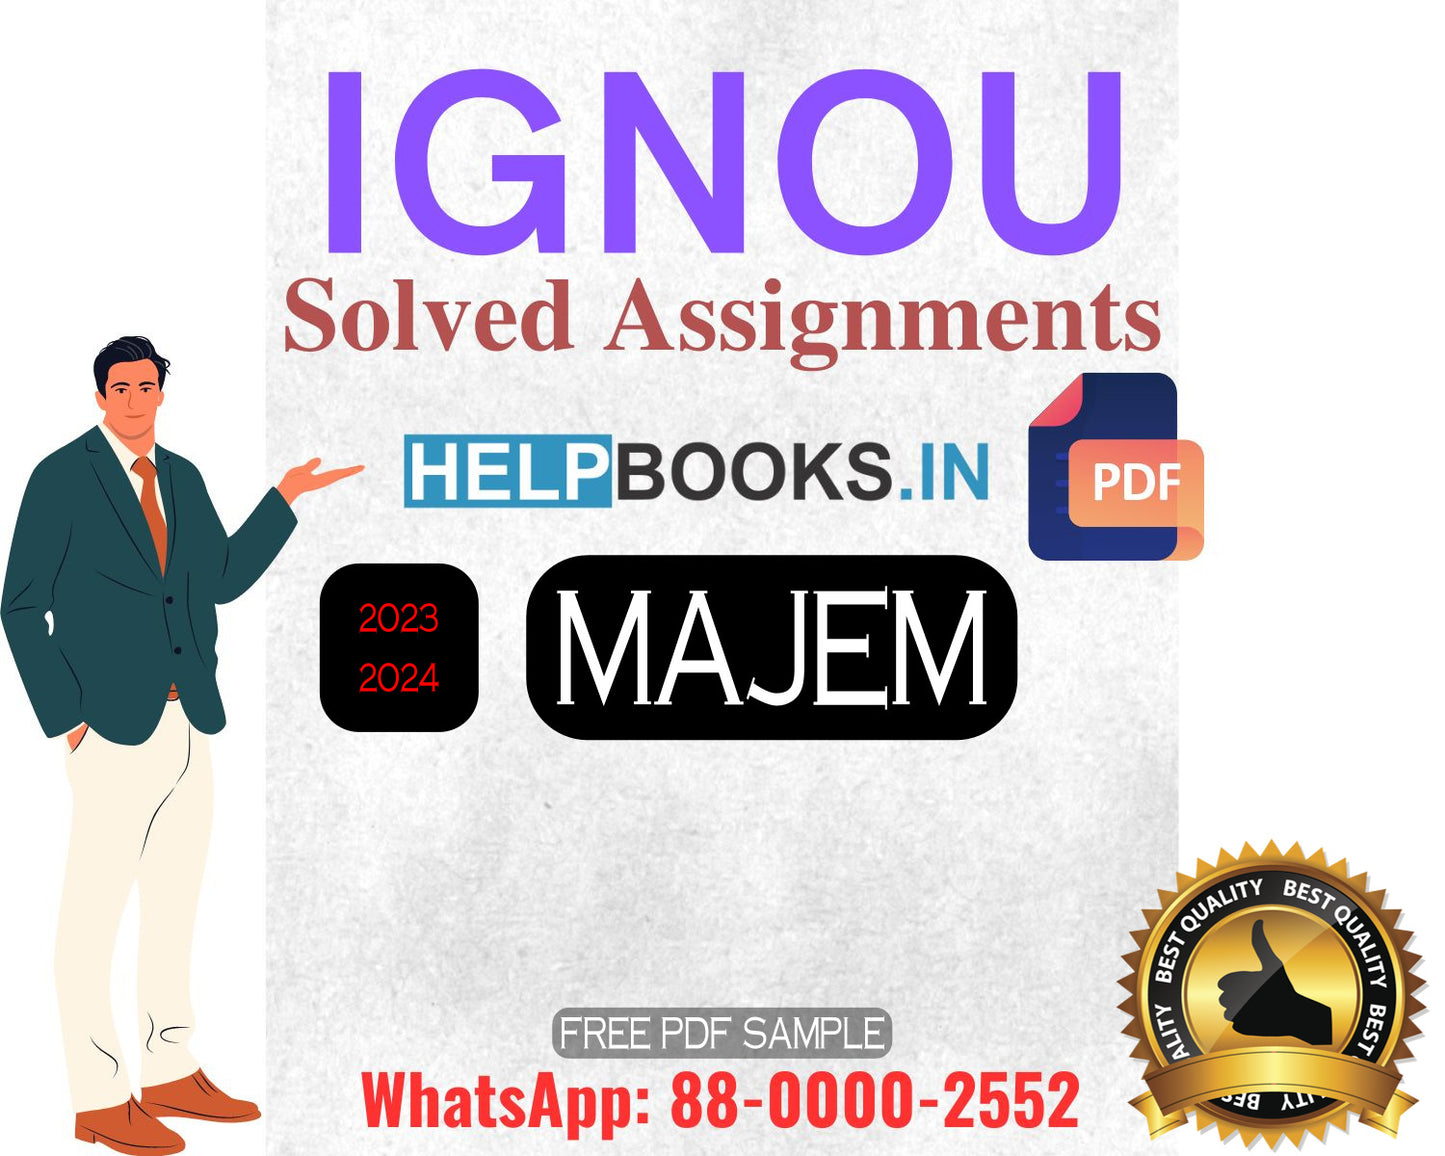 IGNOU Master's Degree Programme Latest IGNOU Solved Assignment 2023-24 & 2022-23 Sessions : MAJEM Master of Arts Journalism and Electronic Media Solved Assignments